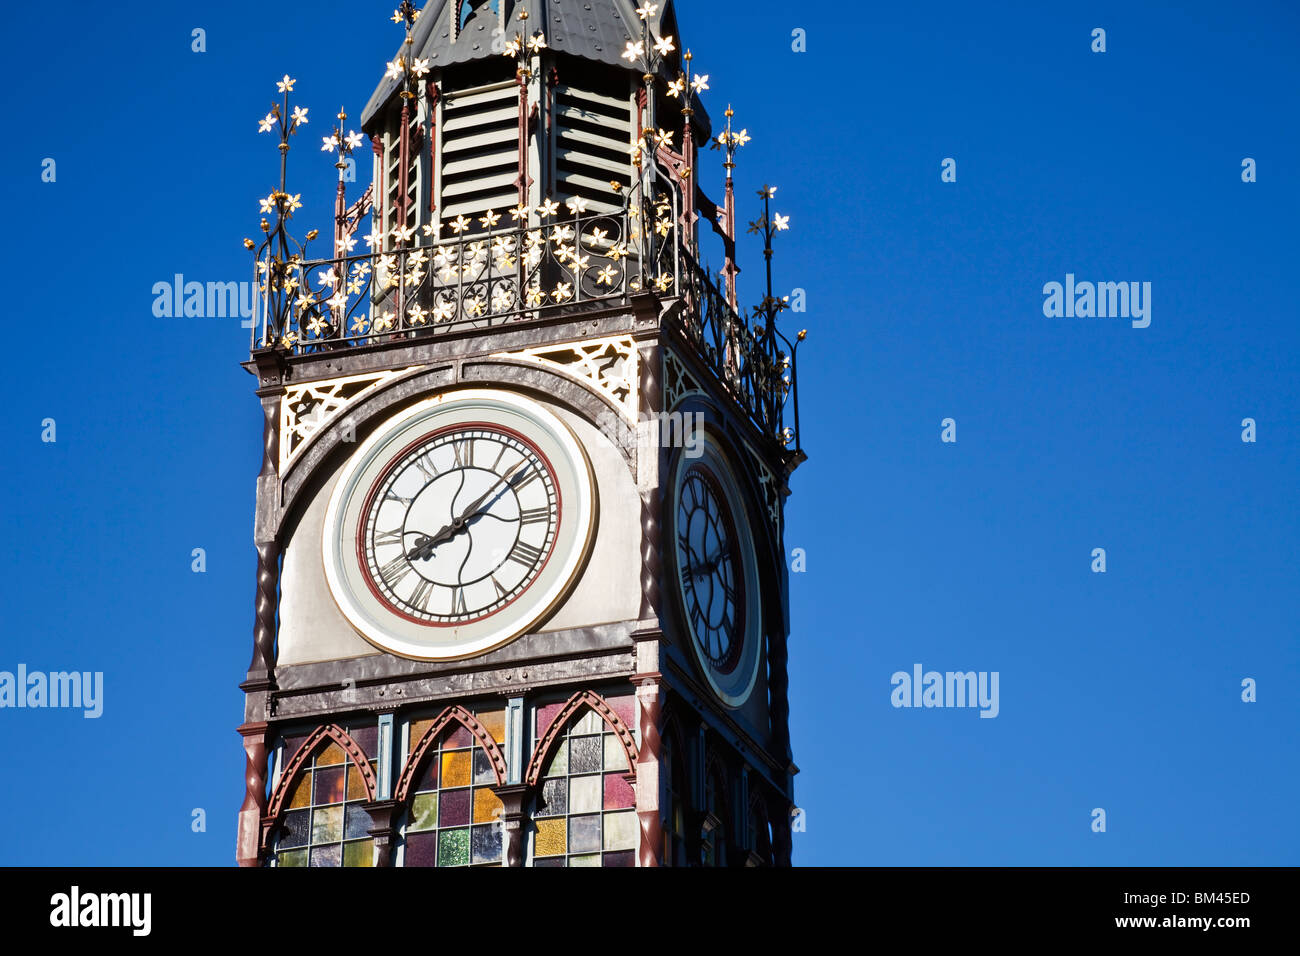 Queen Victoria Jubilee Clock Tower. Christchurch, Canterbury, South Island, New Zealand Stock Photo